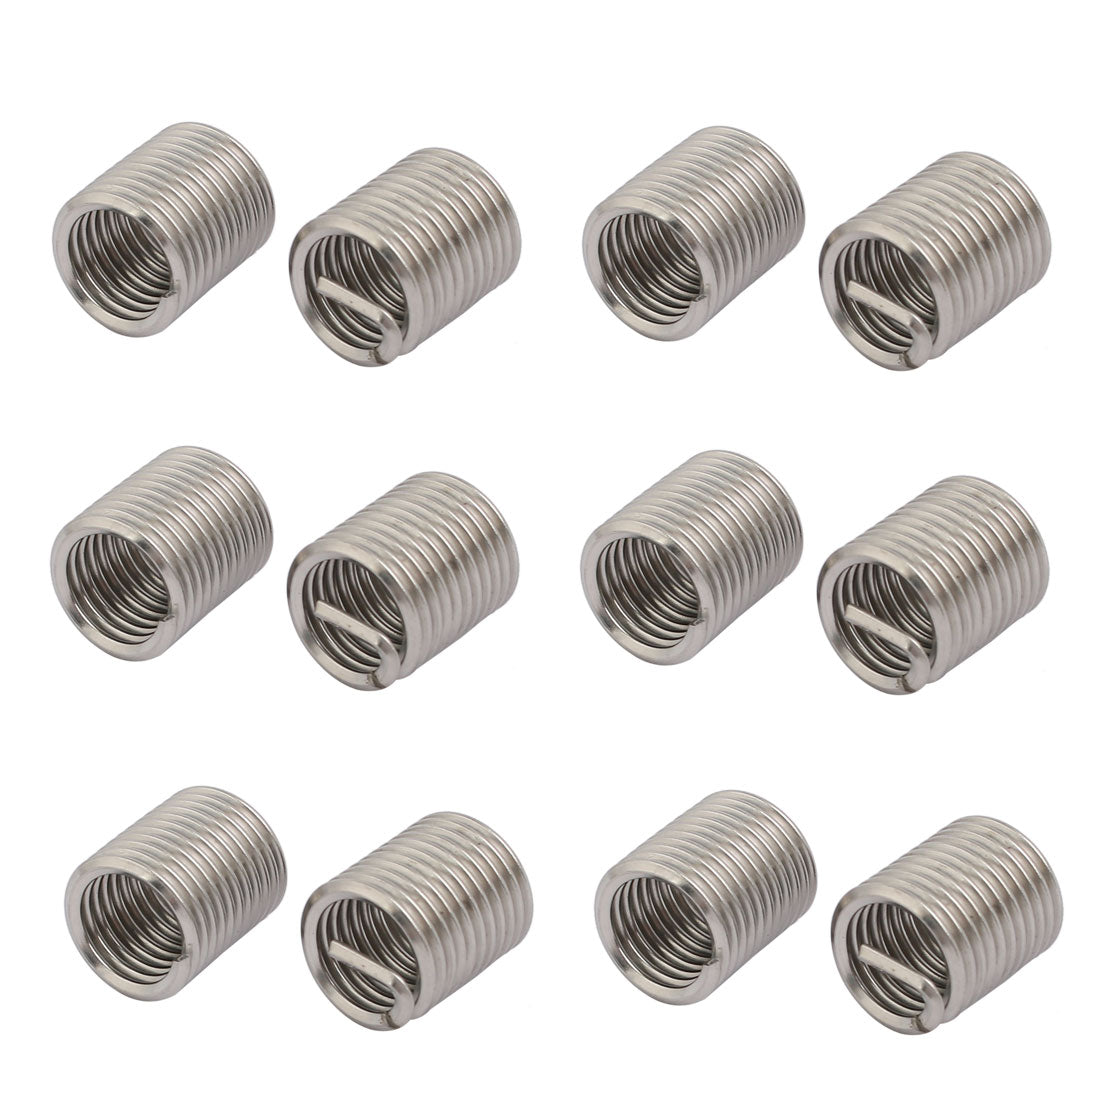 uxcell Uxcell M12x1.75mmx24mm 304 Stainless Steel Helical Coil Wire Thread Insert 12pcs